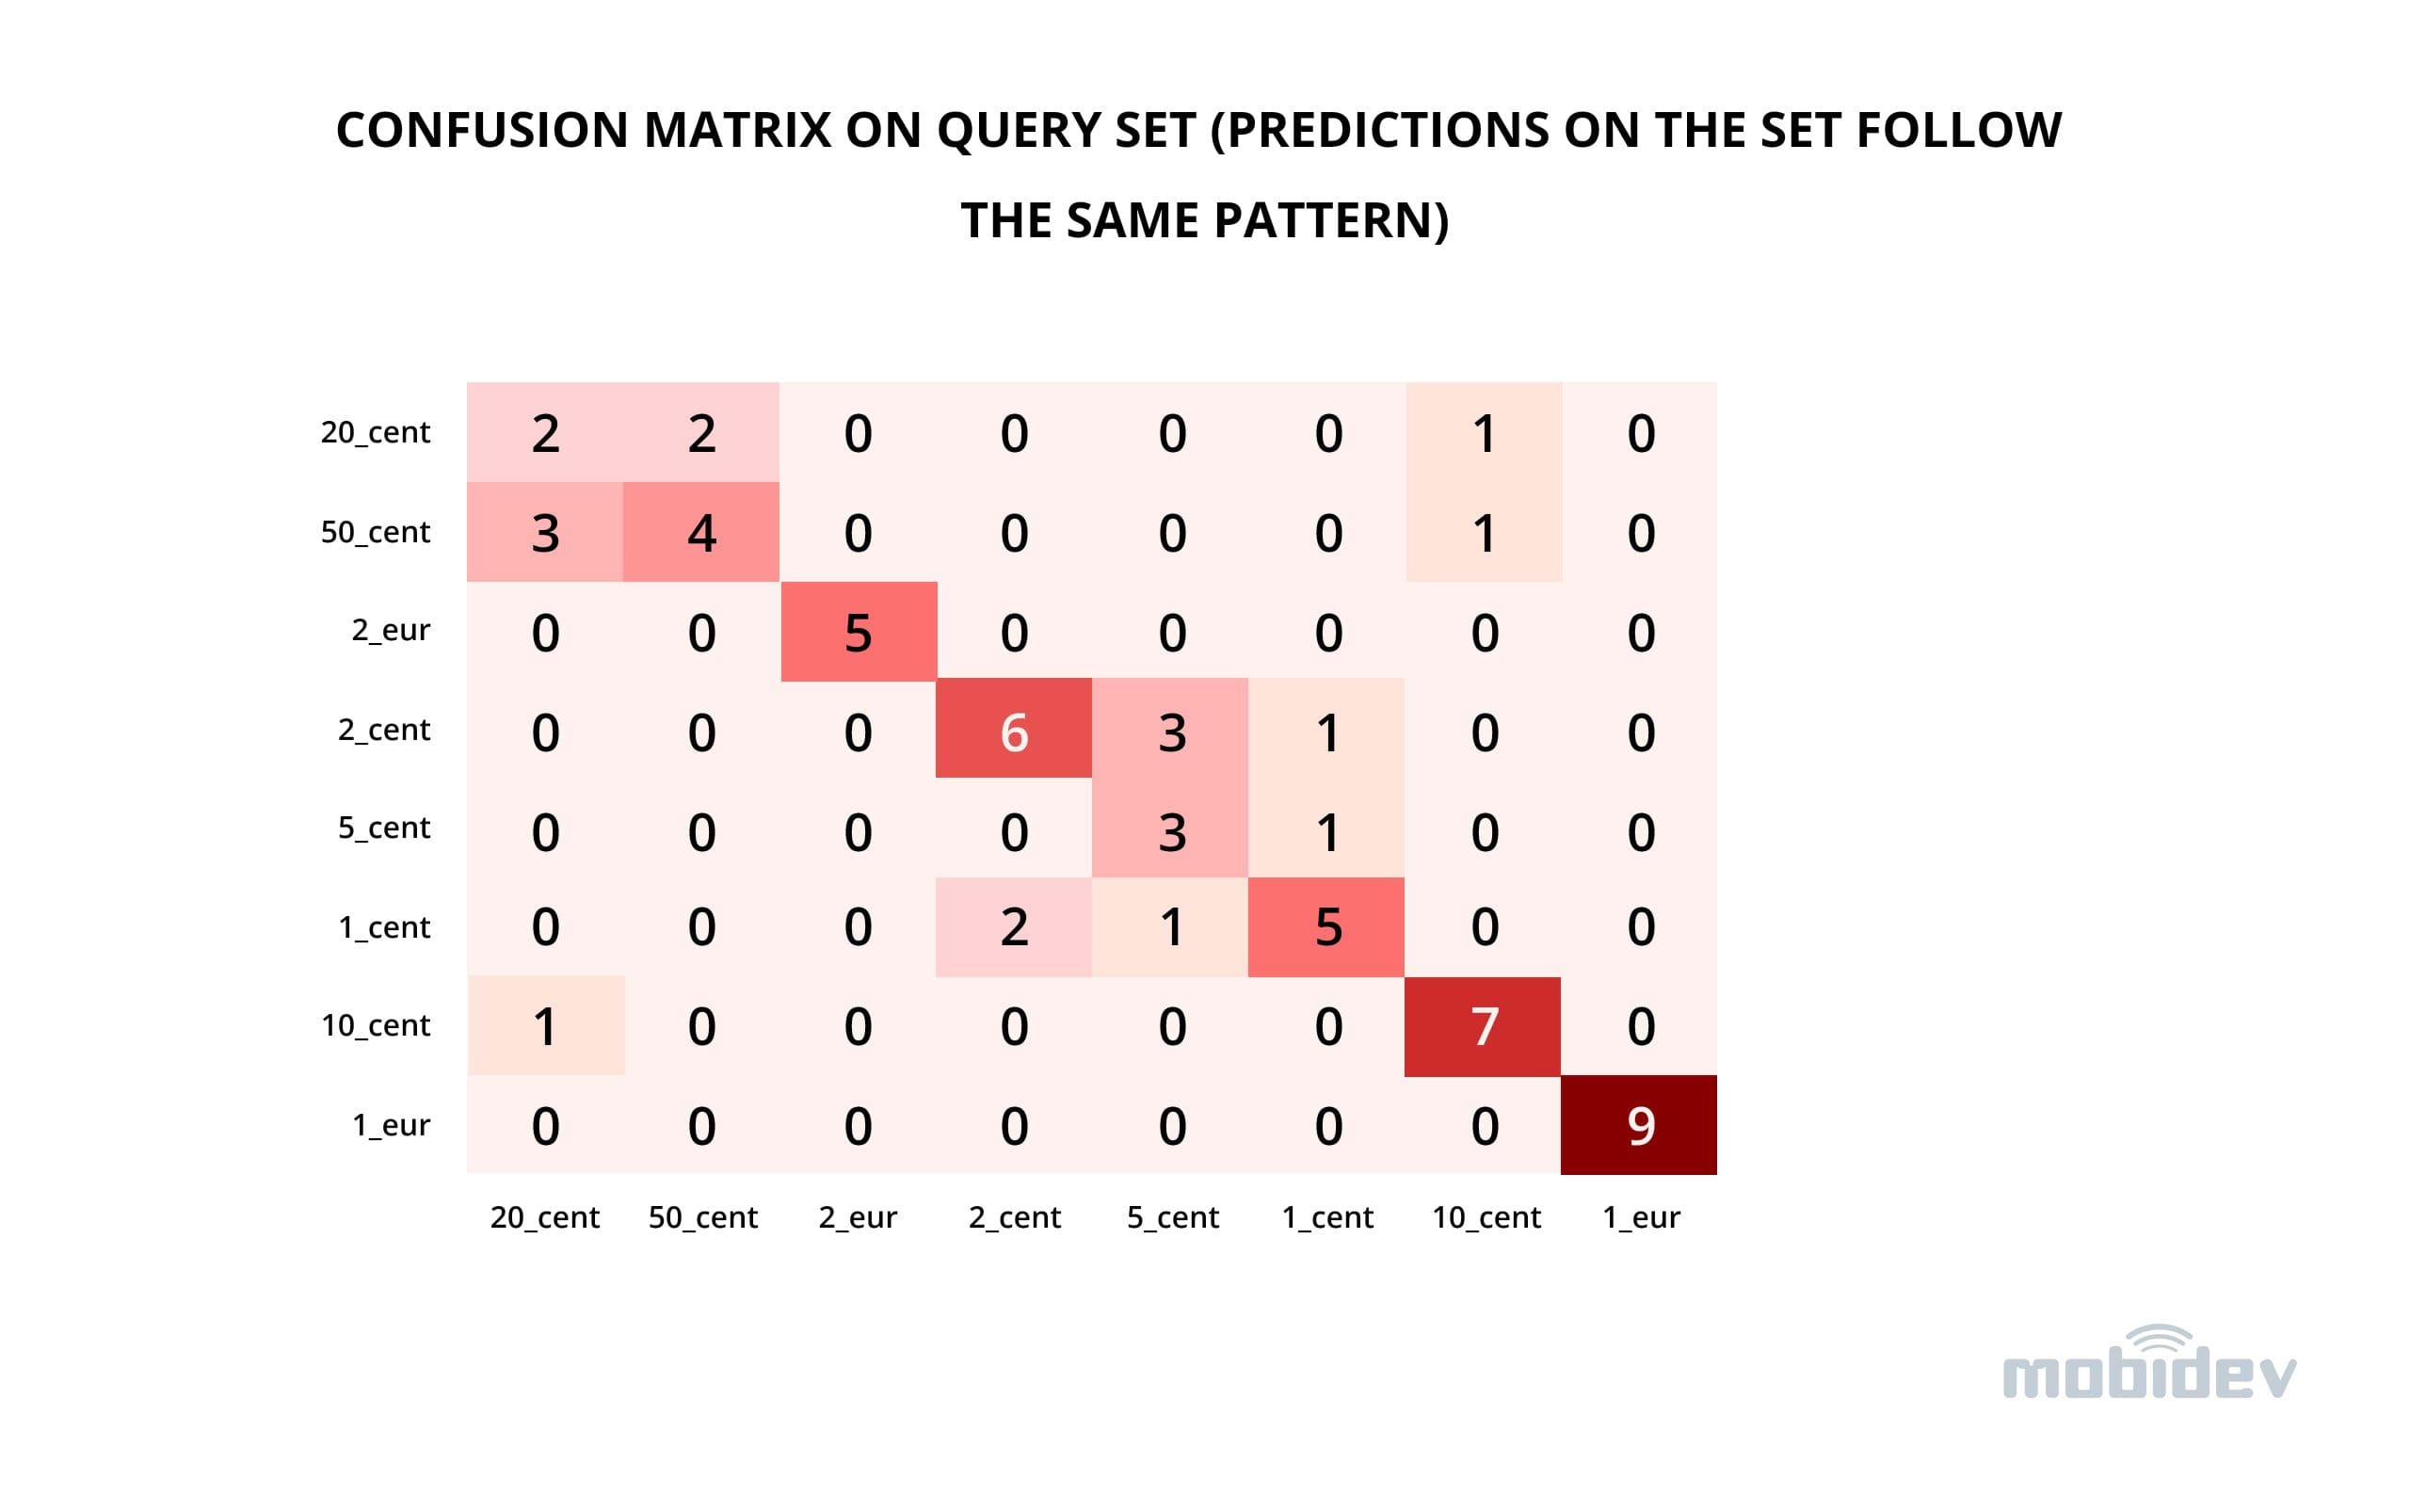 Figure 7. Confusion matrix on query set (predictions on the set follow the same pattern)